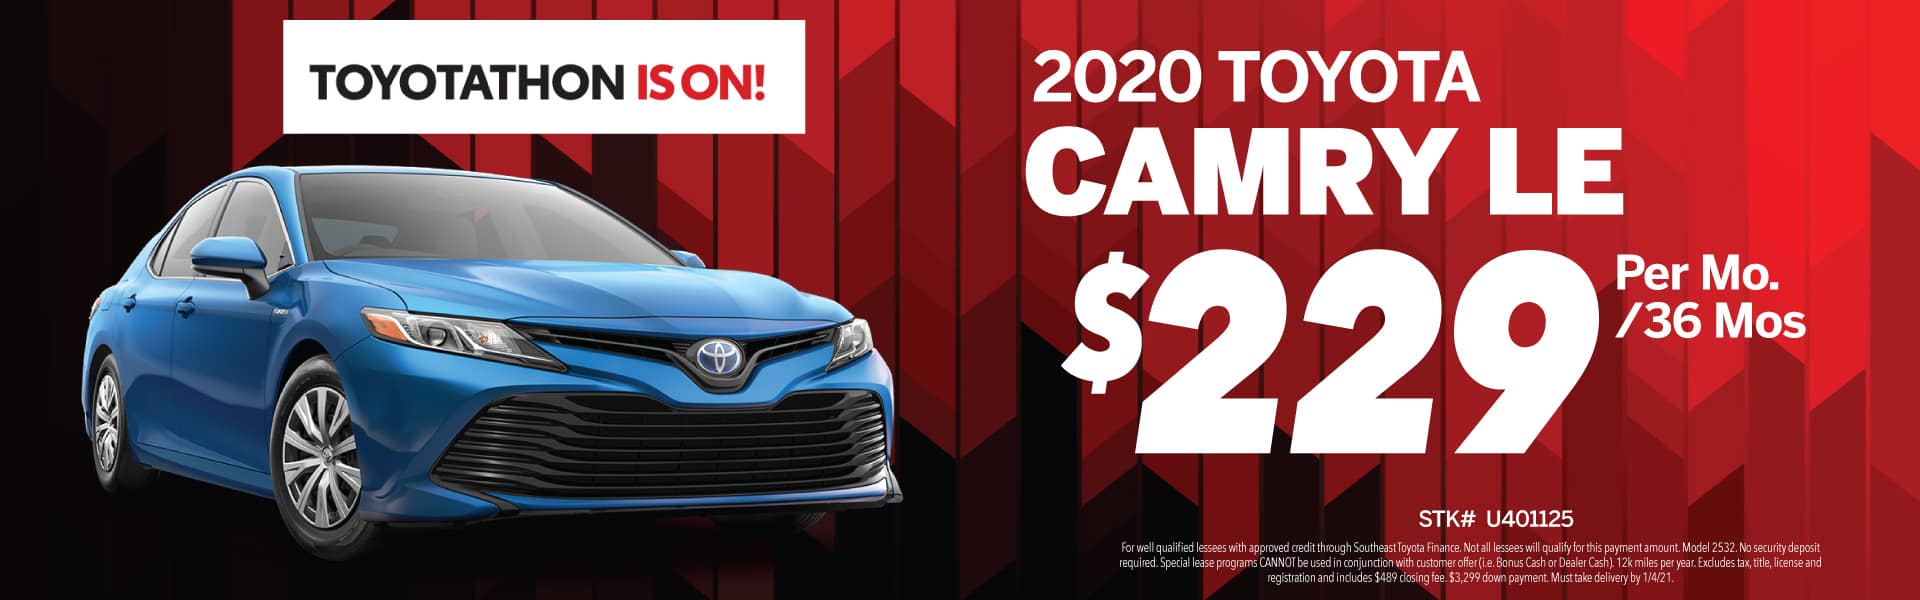 2020 Toyota Camry offer!